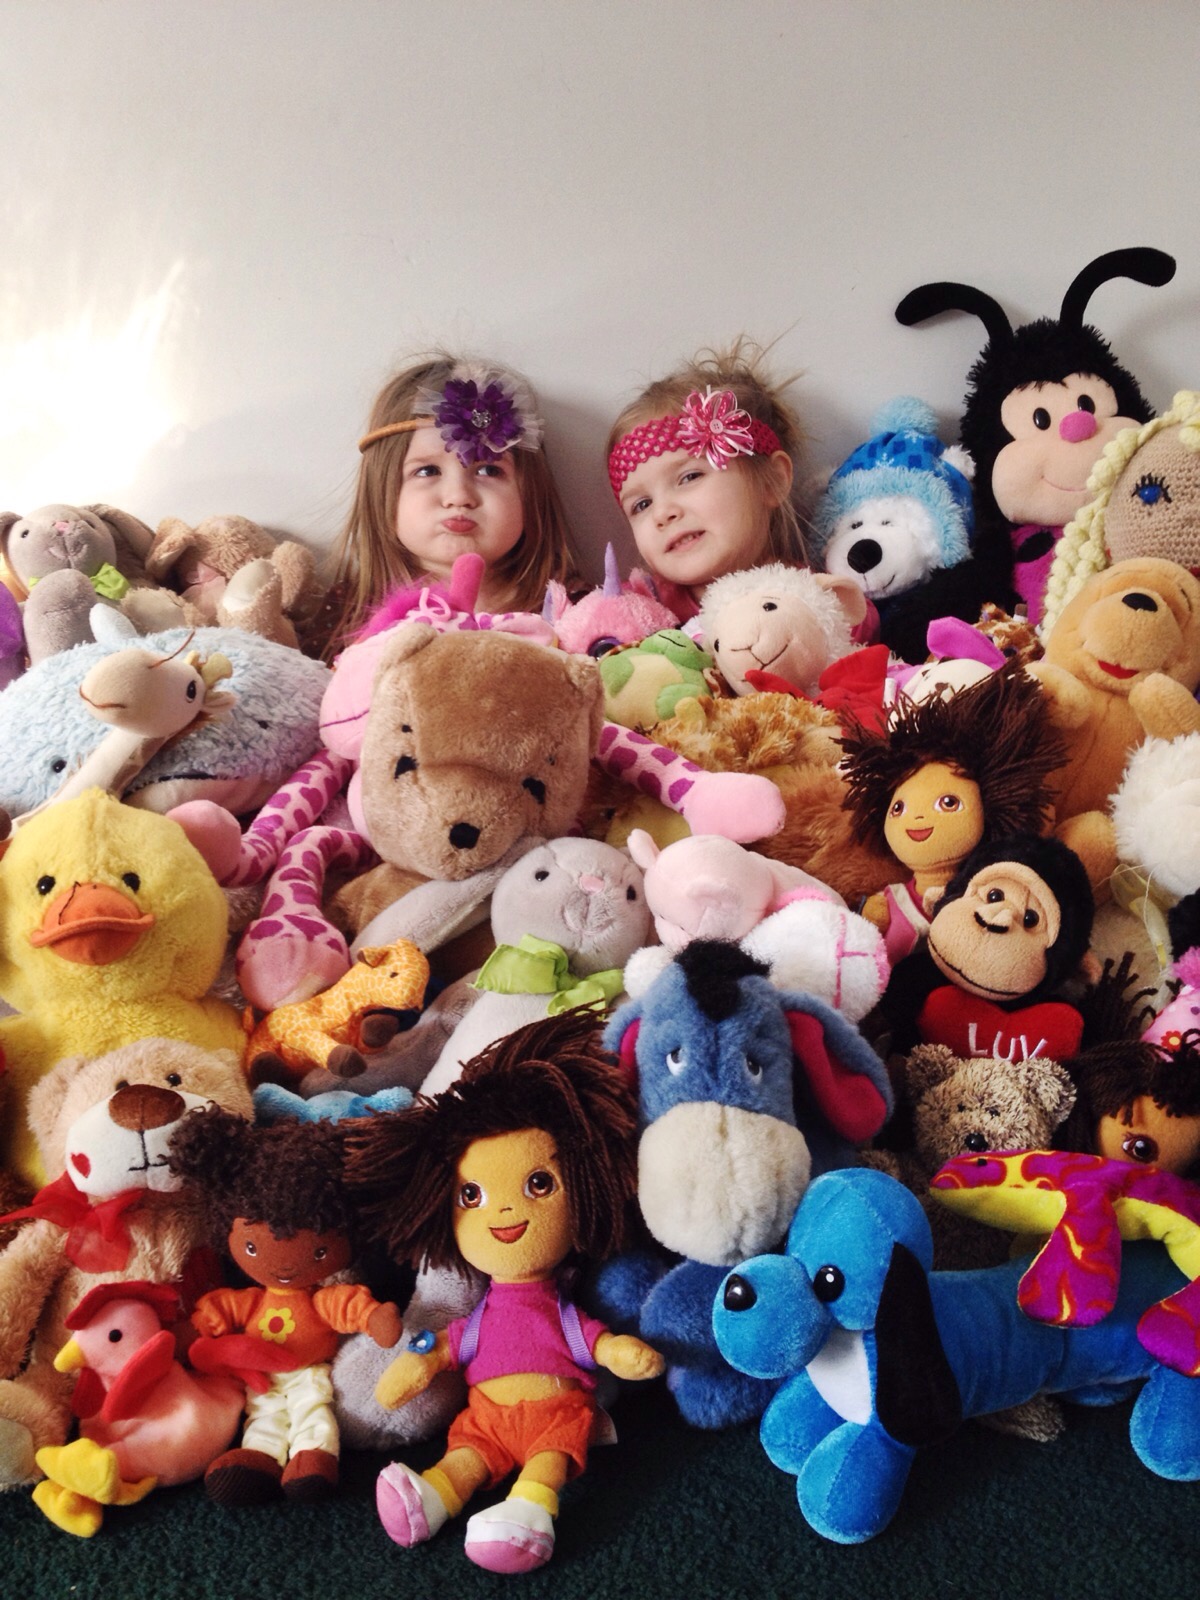 Stuffed Animal Collection - Blissfully Insane